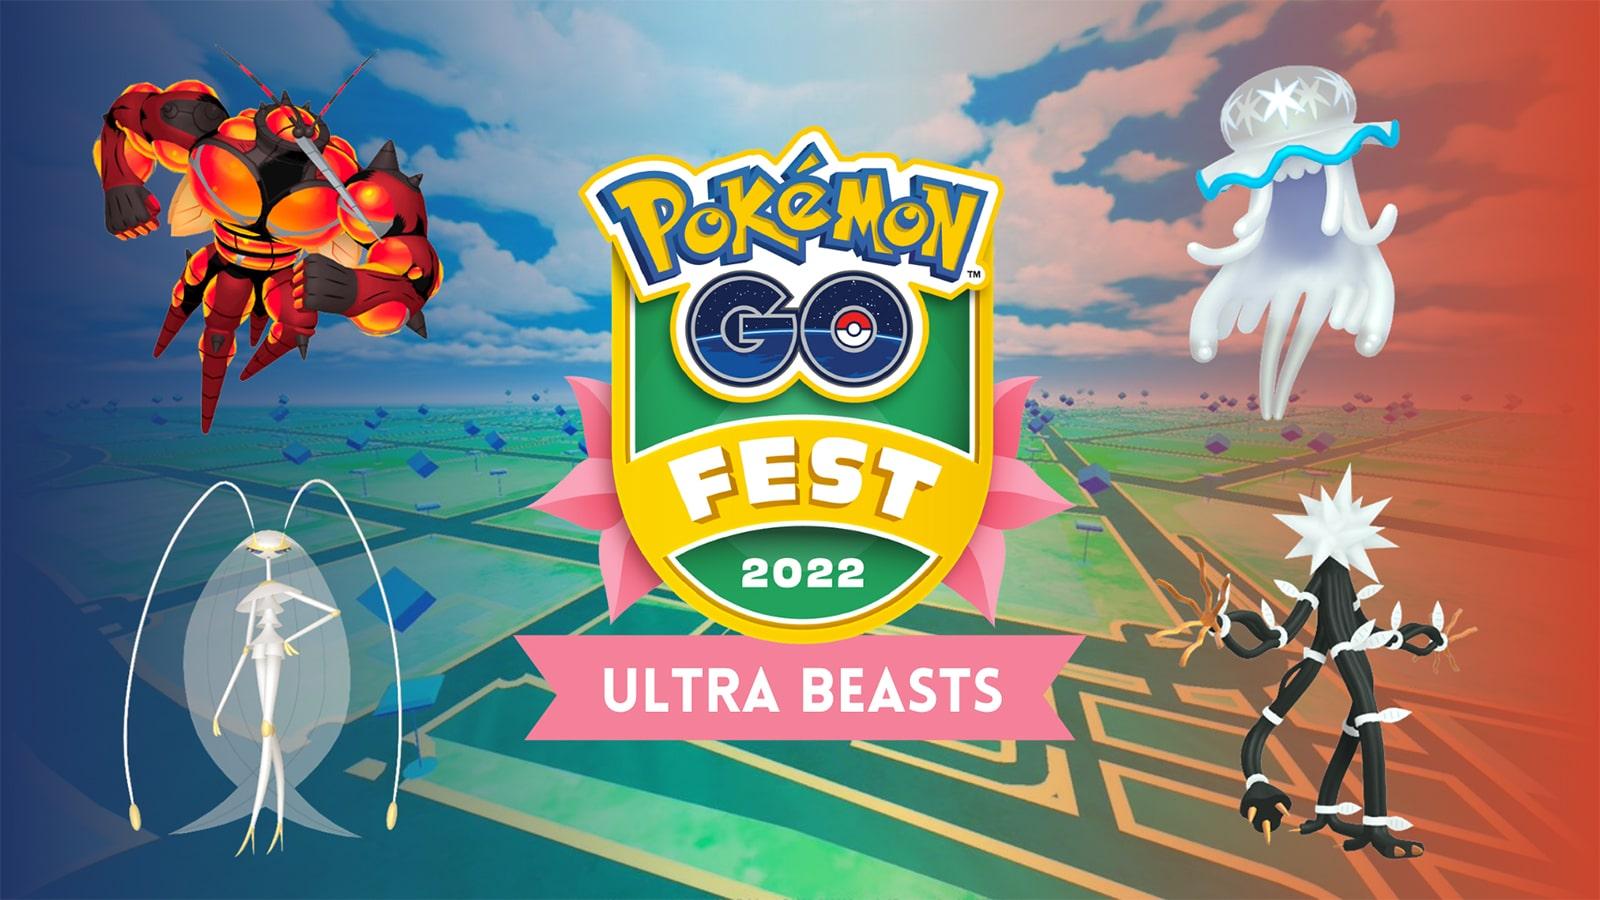 Serebii.net on X: Serebii Update: The Ultra Beasts will appear globally in  the Pokémon GO Fest 2022: Finale event later this month Details being added  @   / X